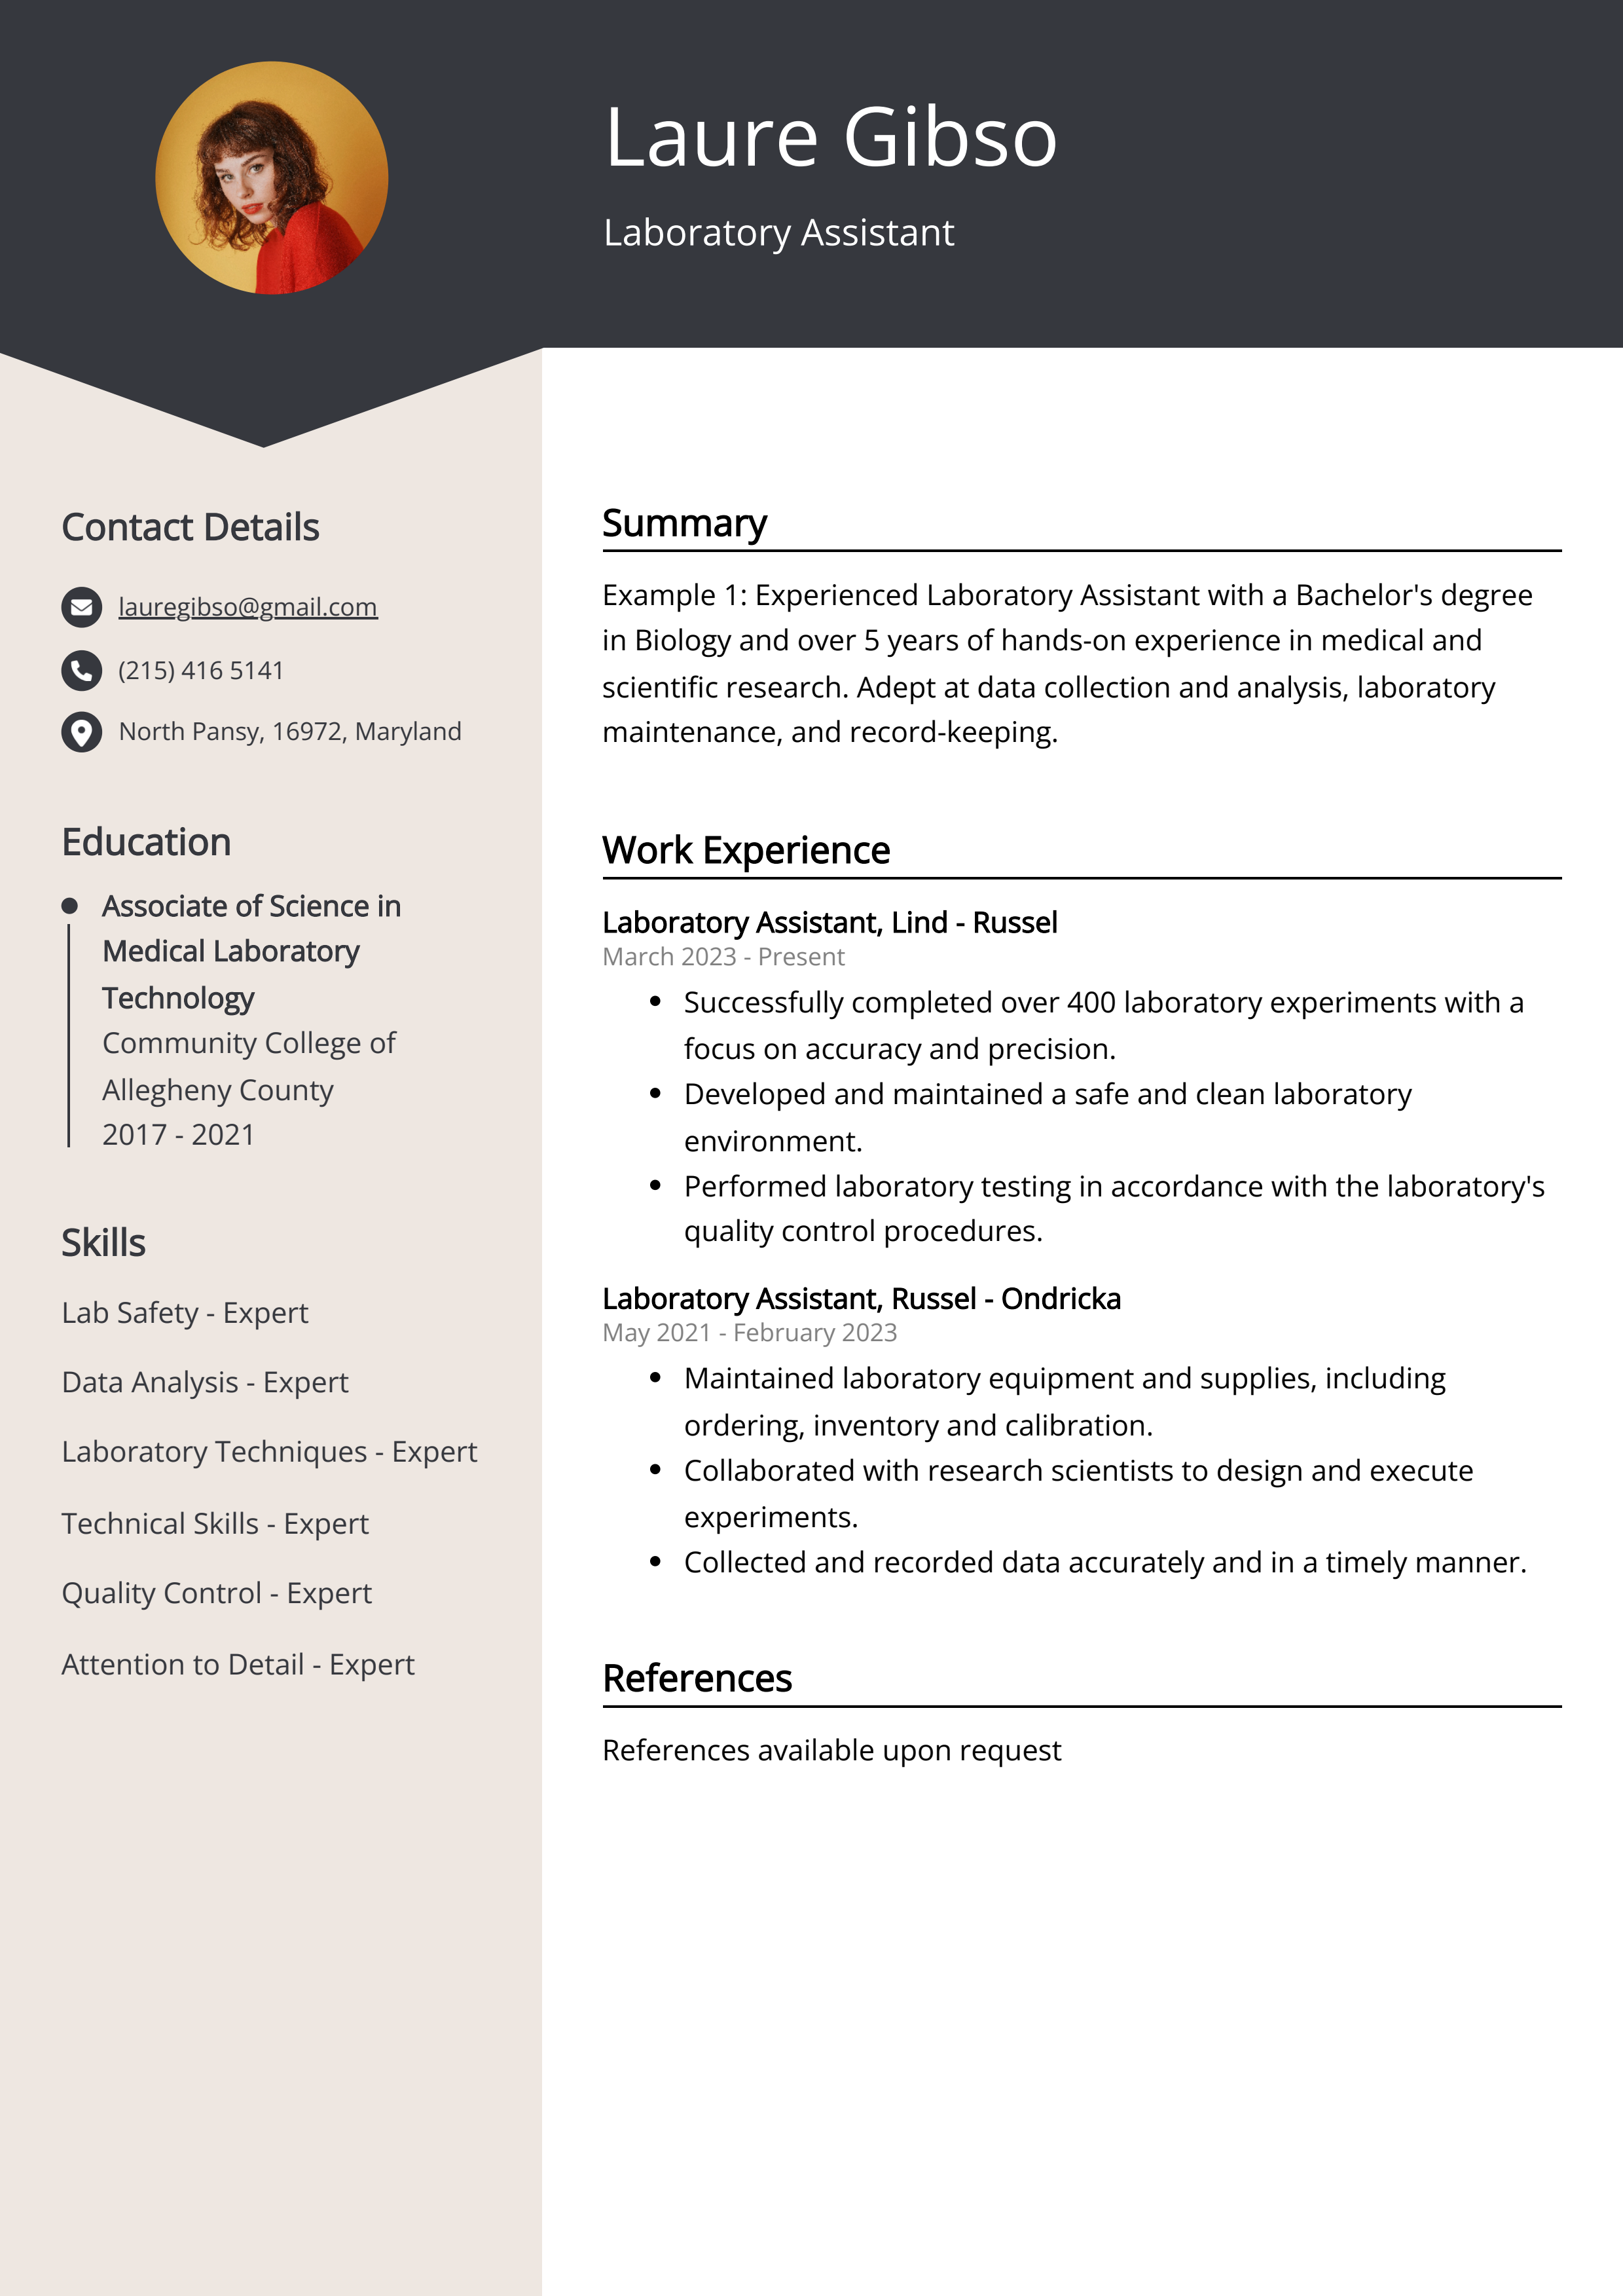 Laboratory Assistant CV Example